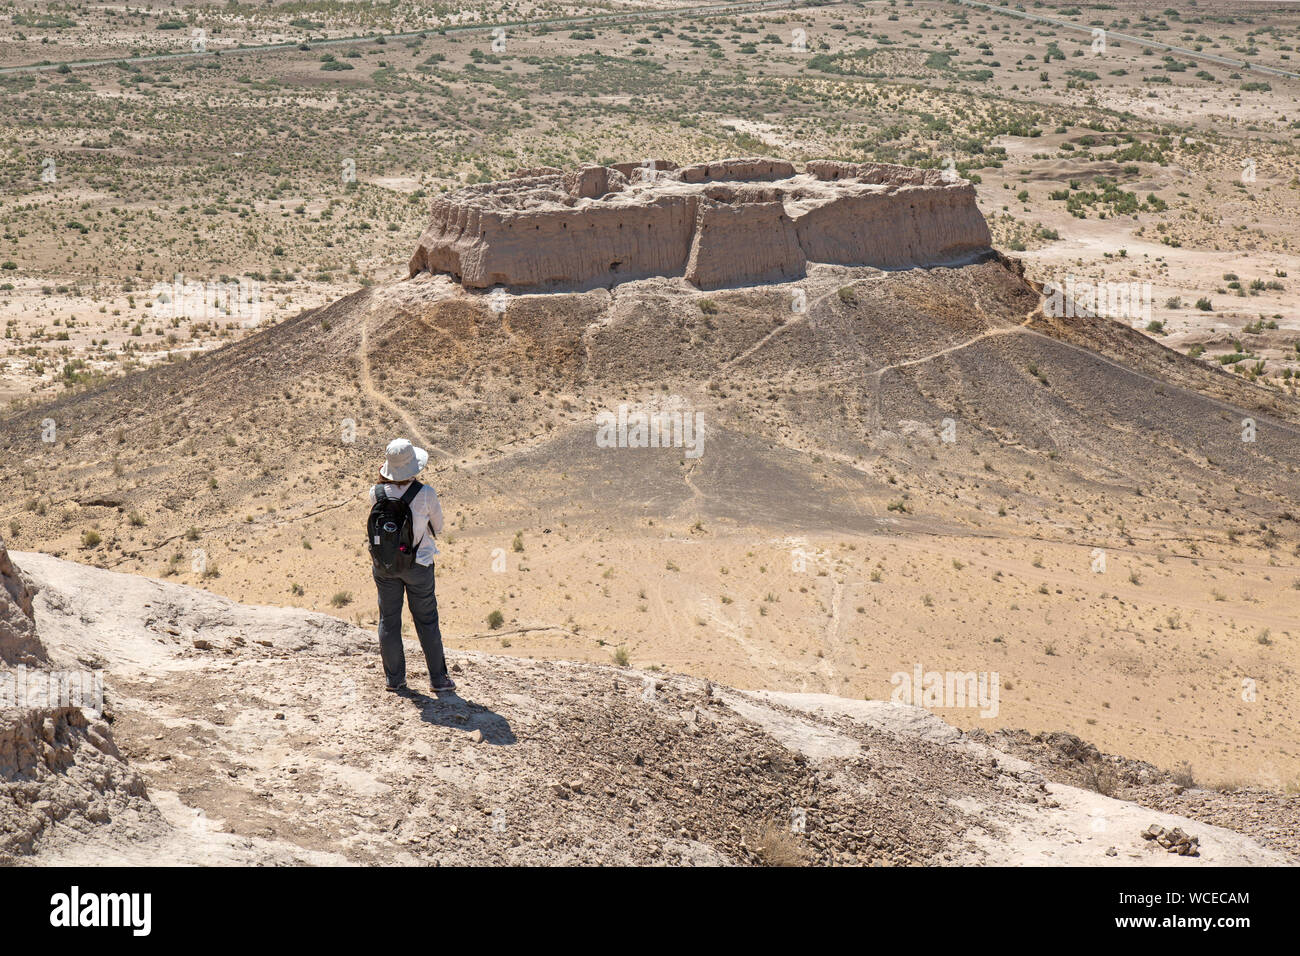 Female tourist looking over the Ayaz Kala Fort, Uzbekistan. Situated on a hilltop overlooking the Kyzylkum desert. Built in the second century AD. Stock Photo